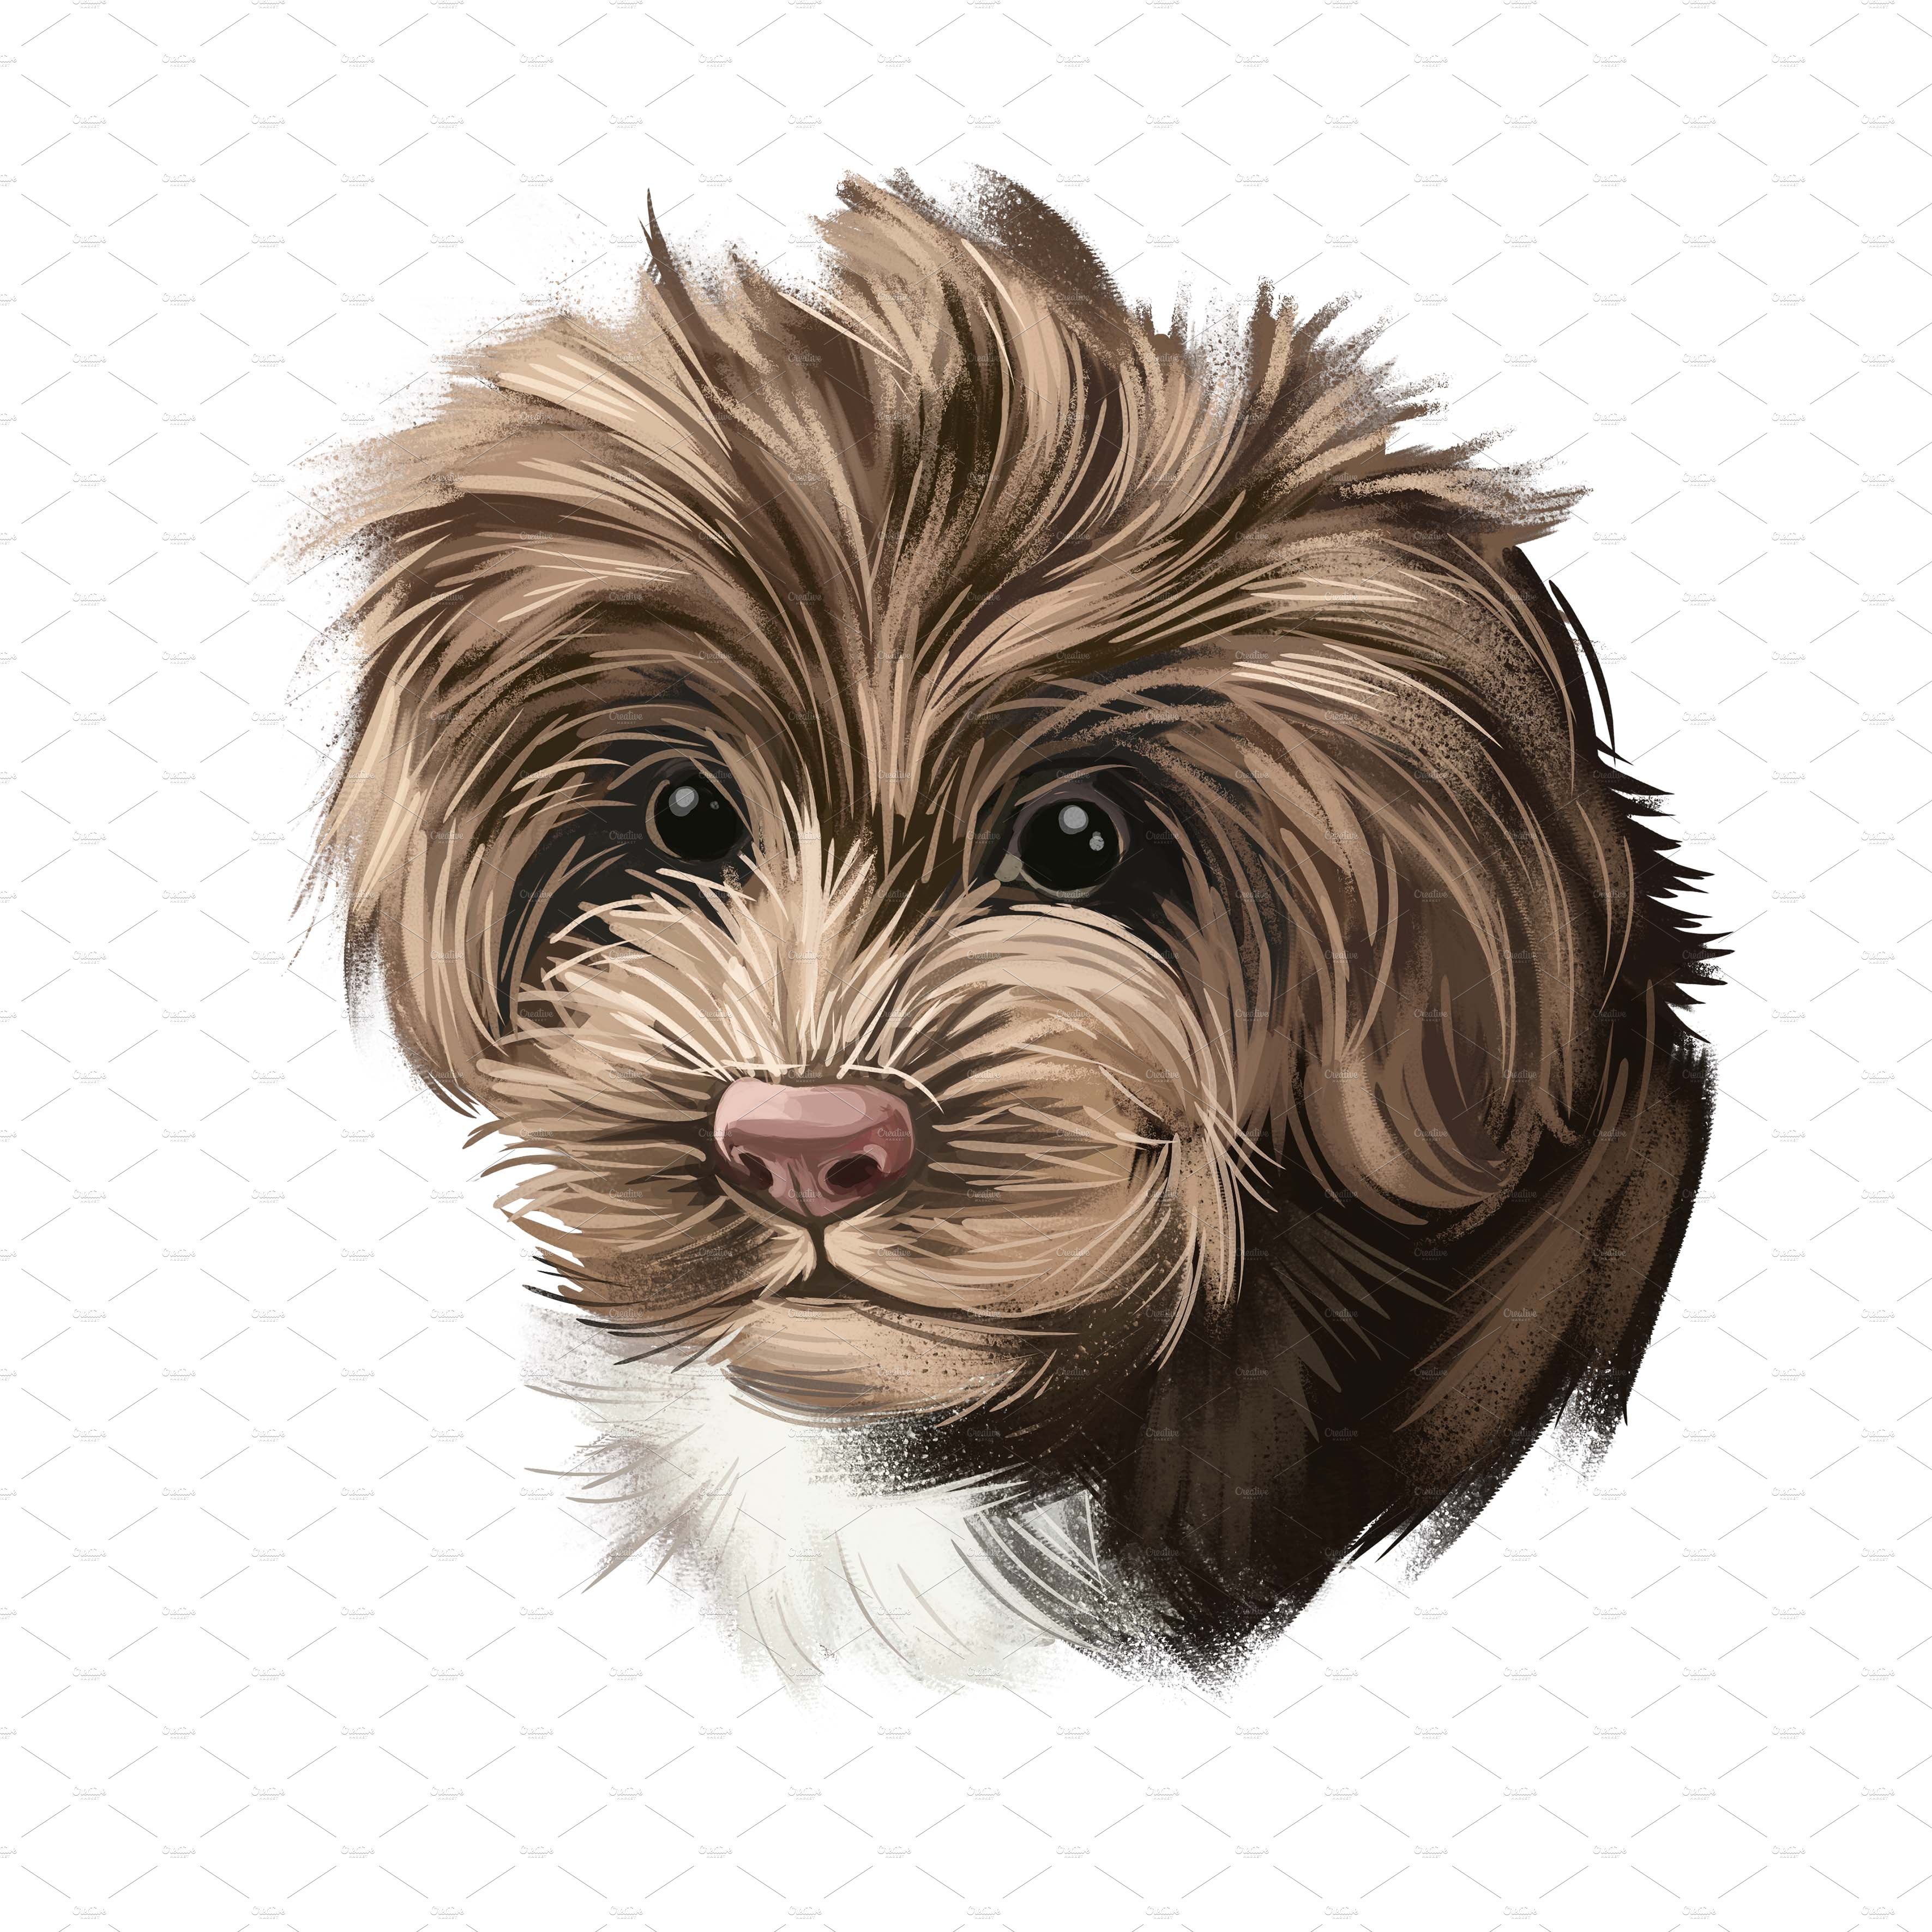 25. sproodle puppy png 28229 982